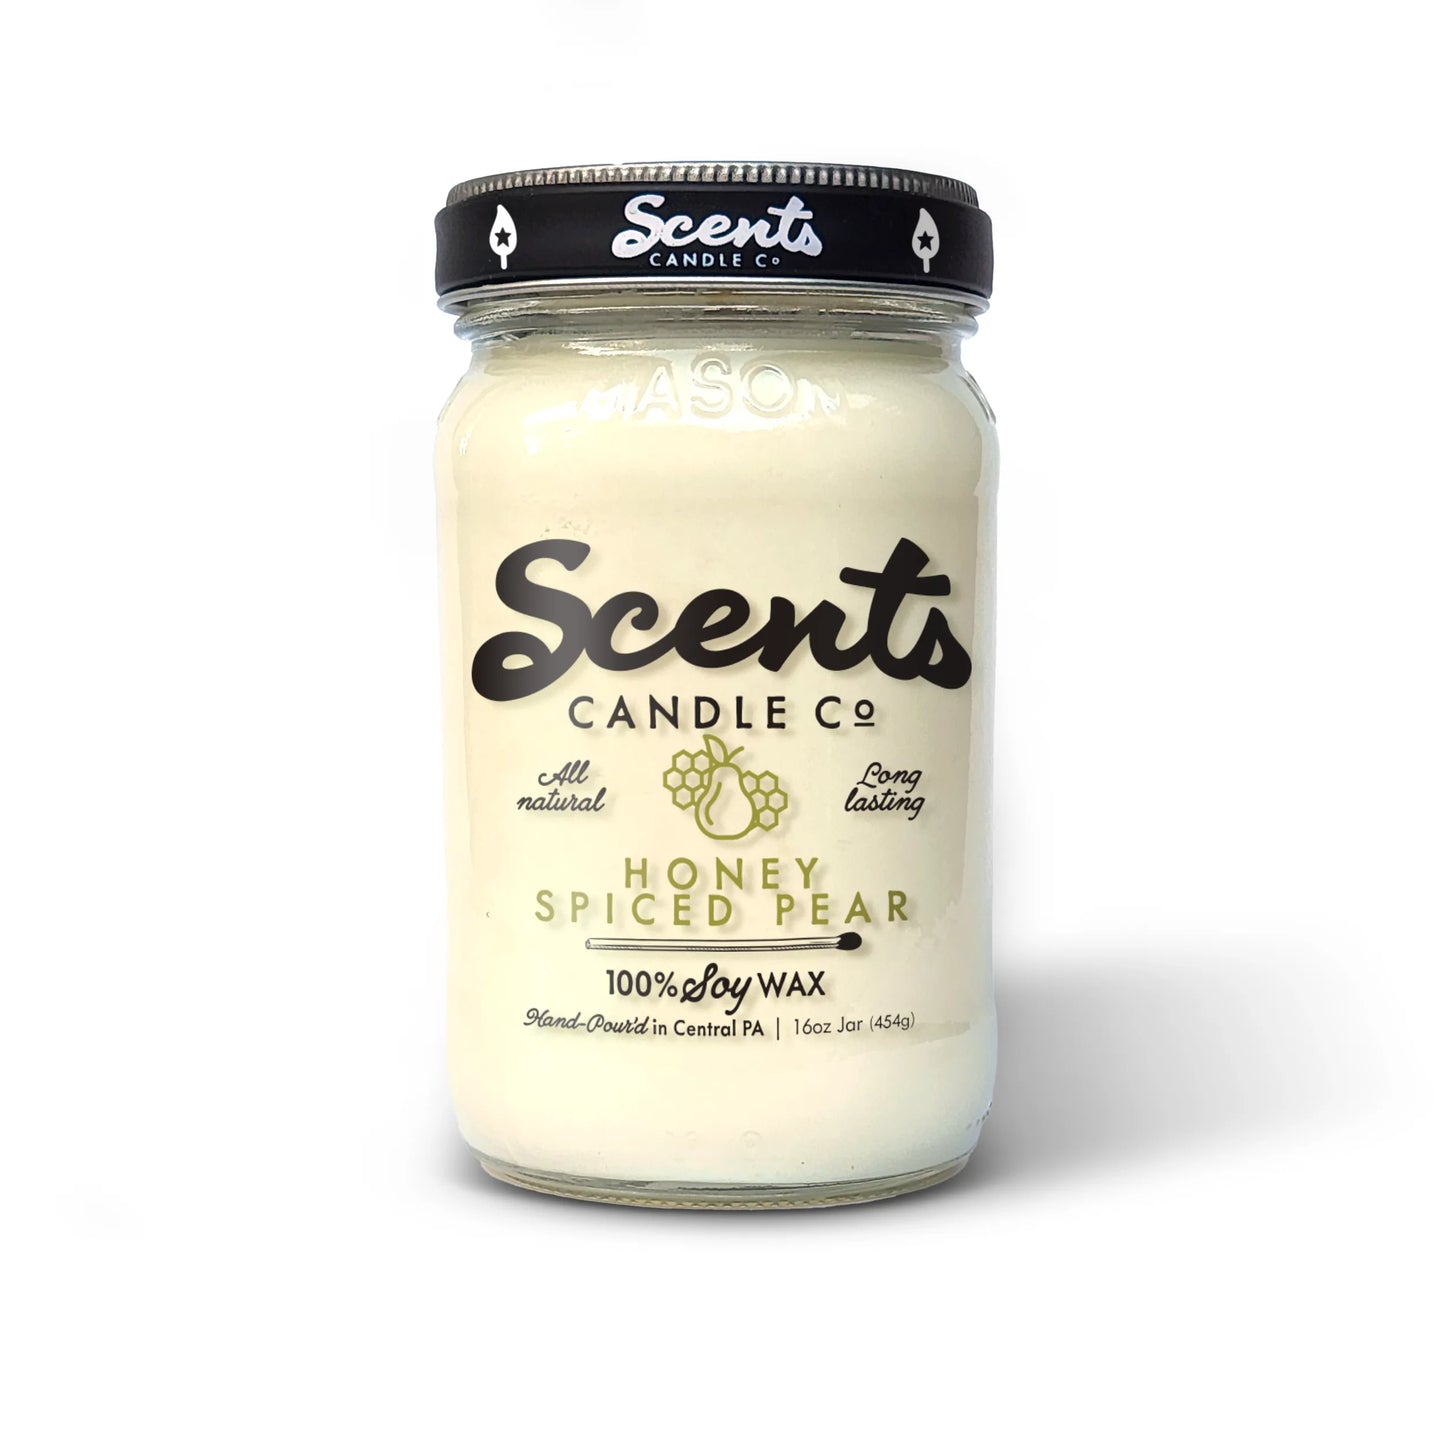 Scents Candle Co. Honey Spiced Pear Soy Wax Candles